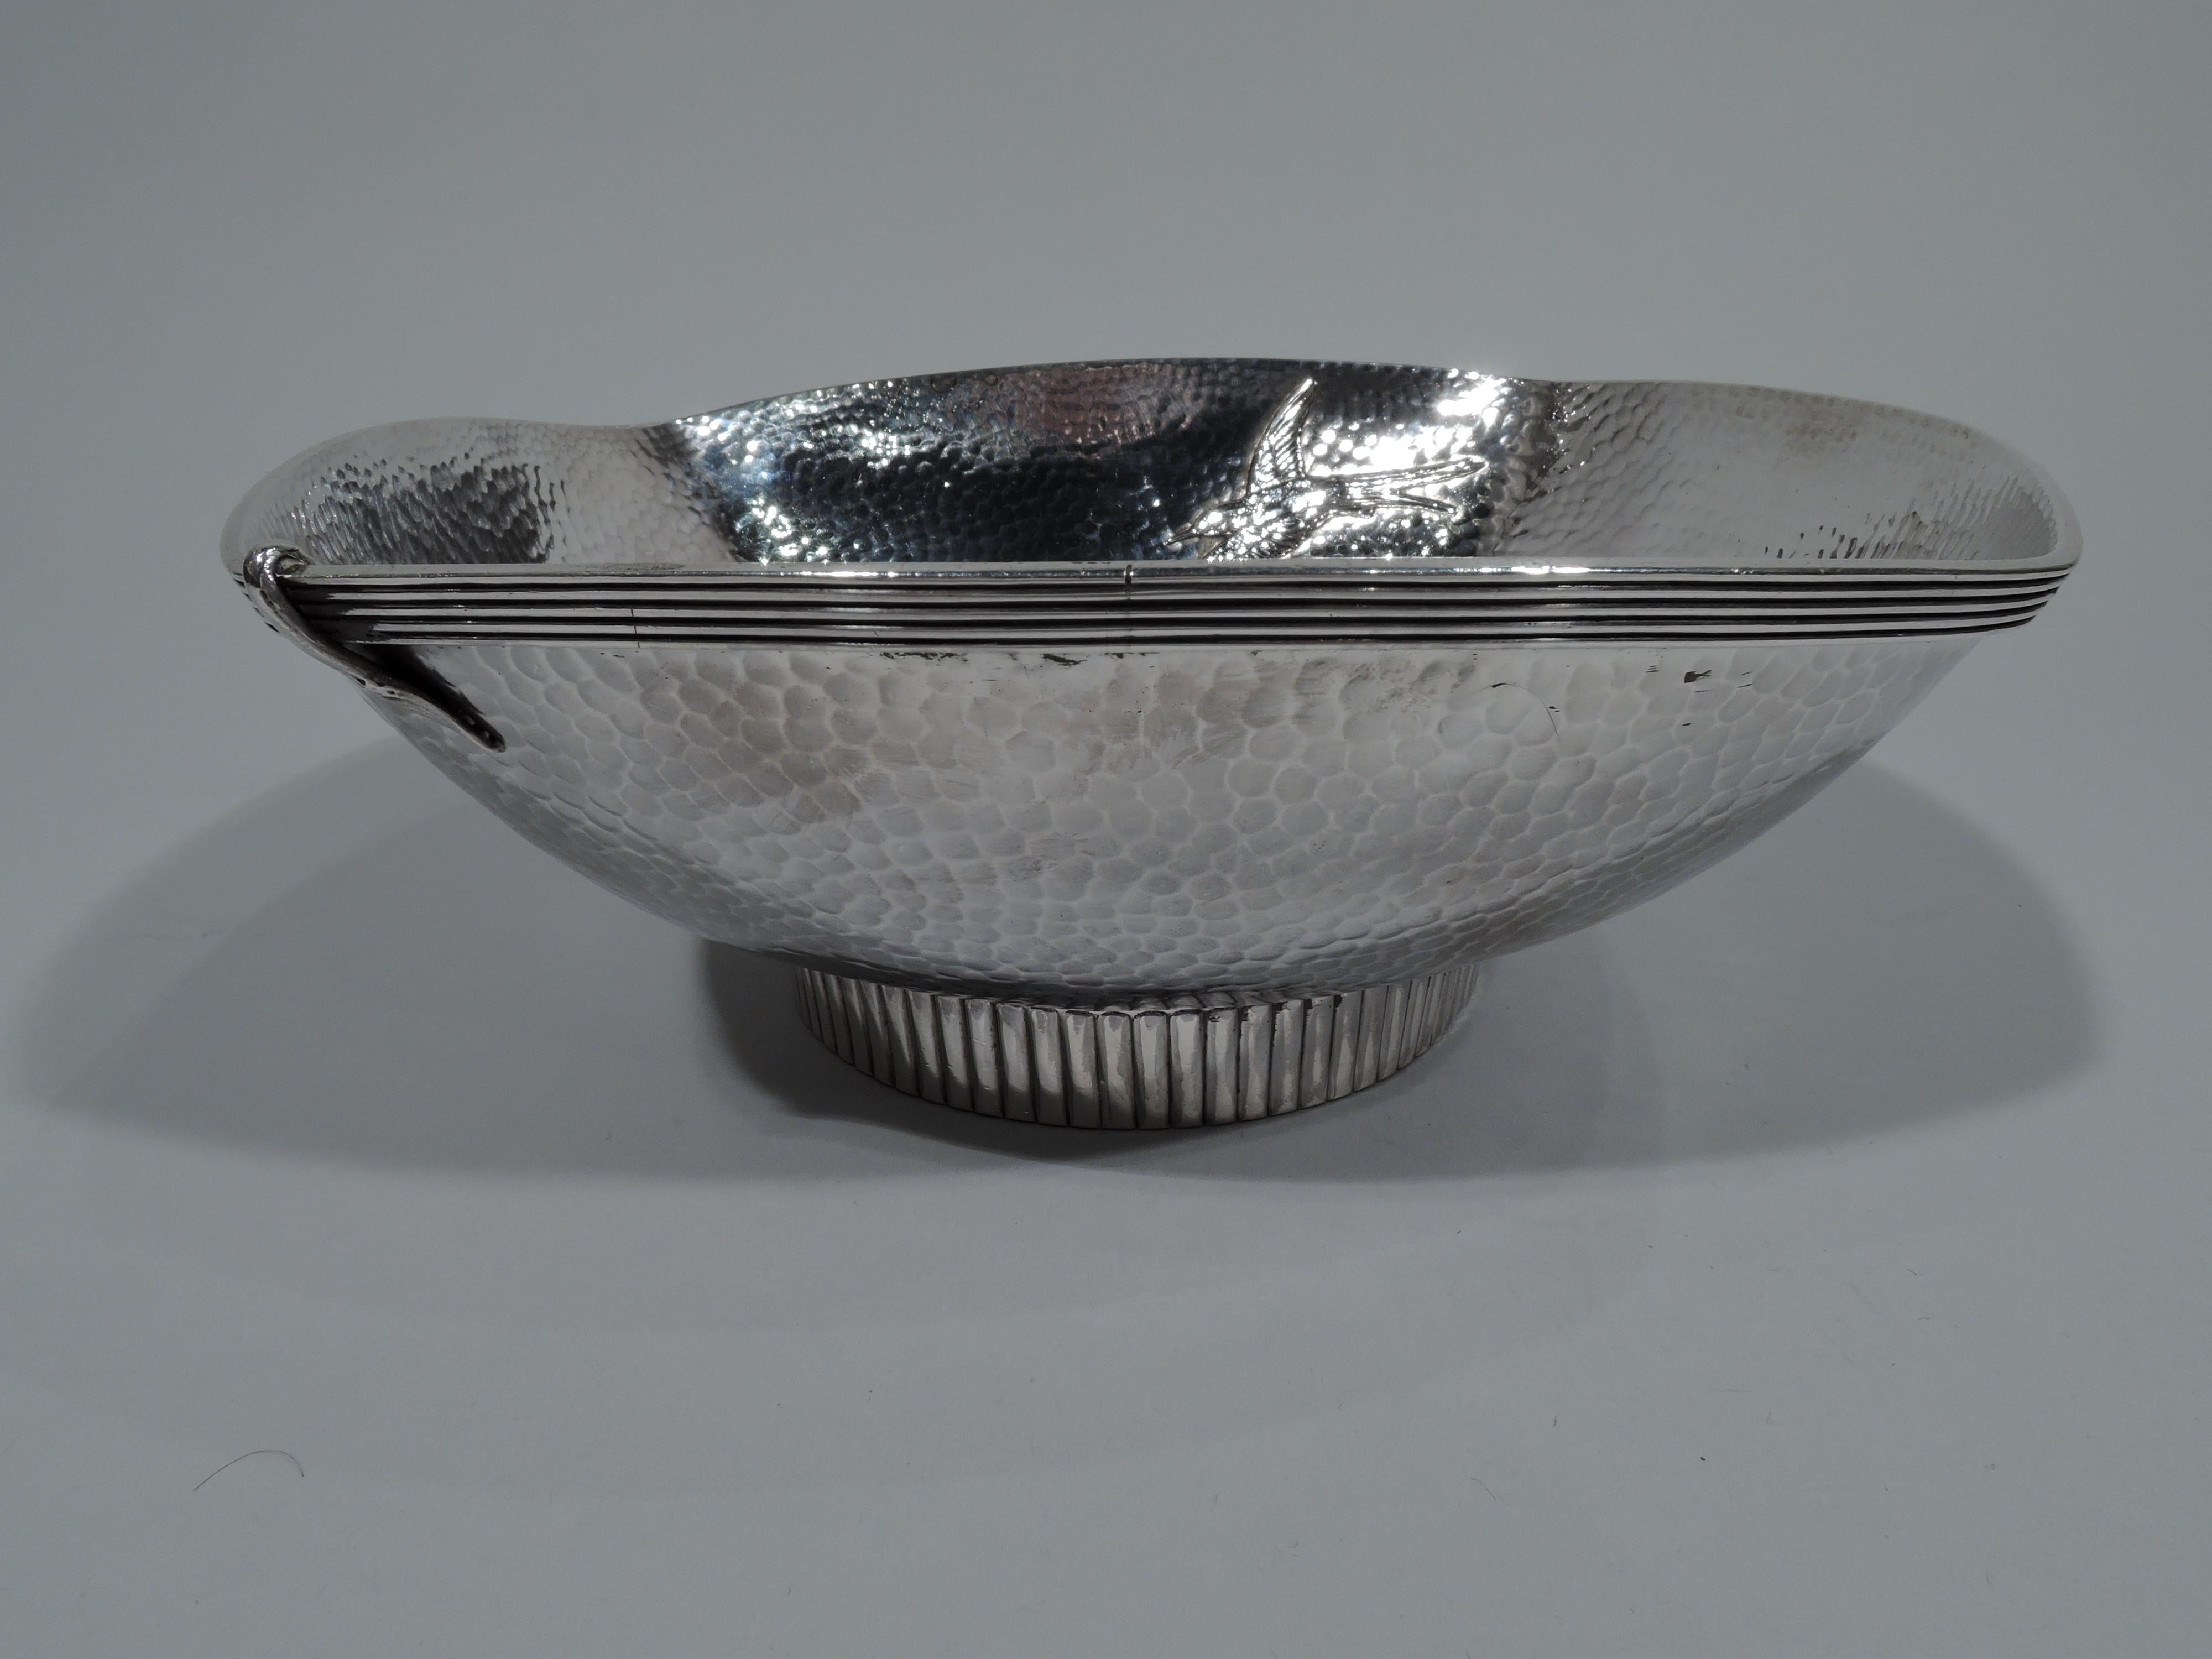 Japonesque sterling silver bowl. Made by Gorham in Providence in 1879. Four curved sides and short round ribbed foot. A pair of humming birds with flapping wings go beak-to-beak perched on a leafy branch. A third flies solo. Hand-hammered honeycomb